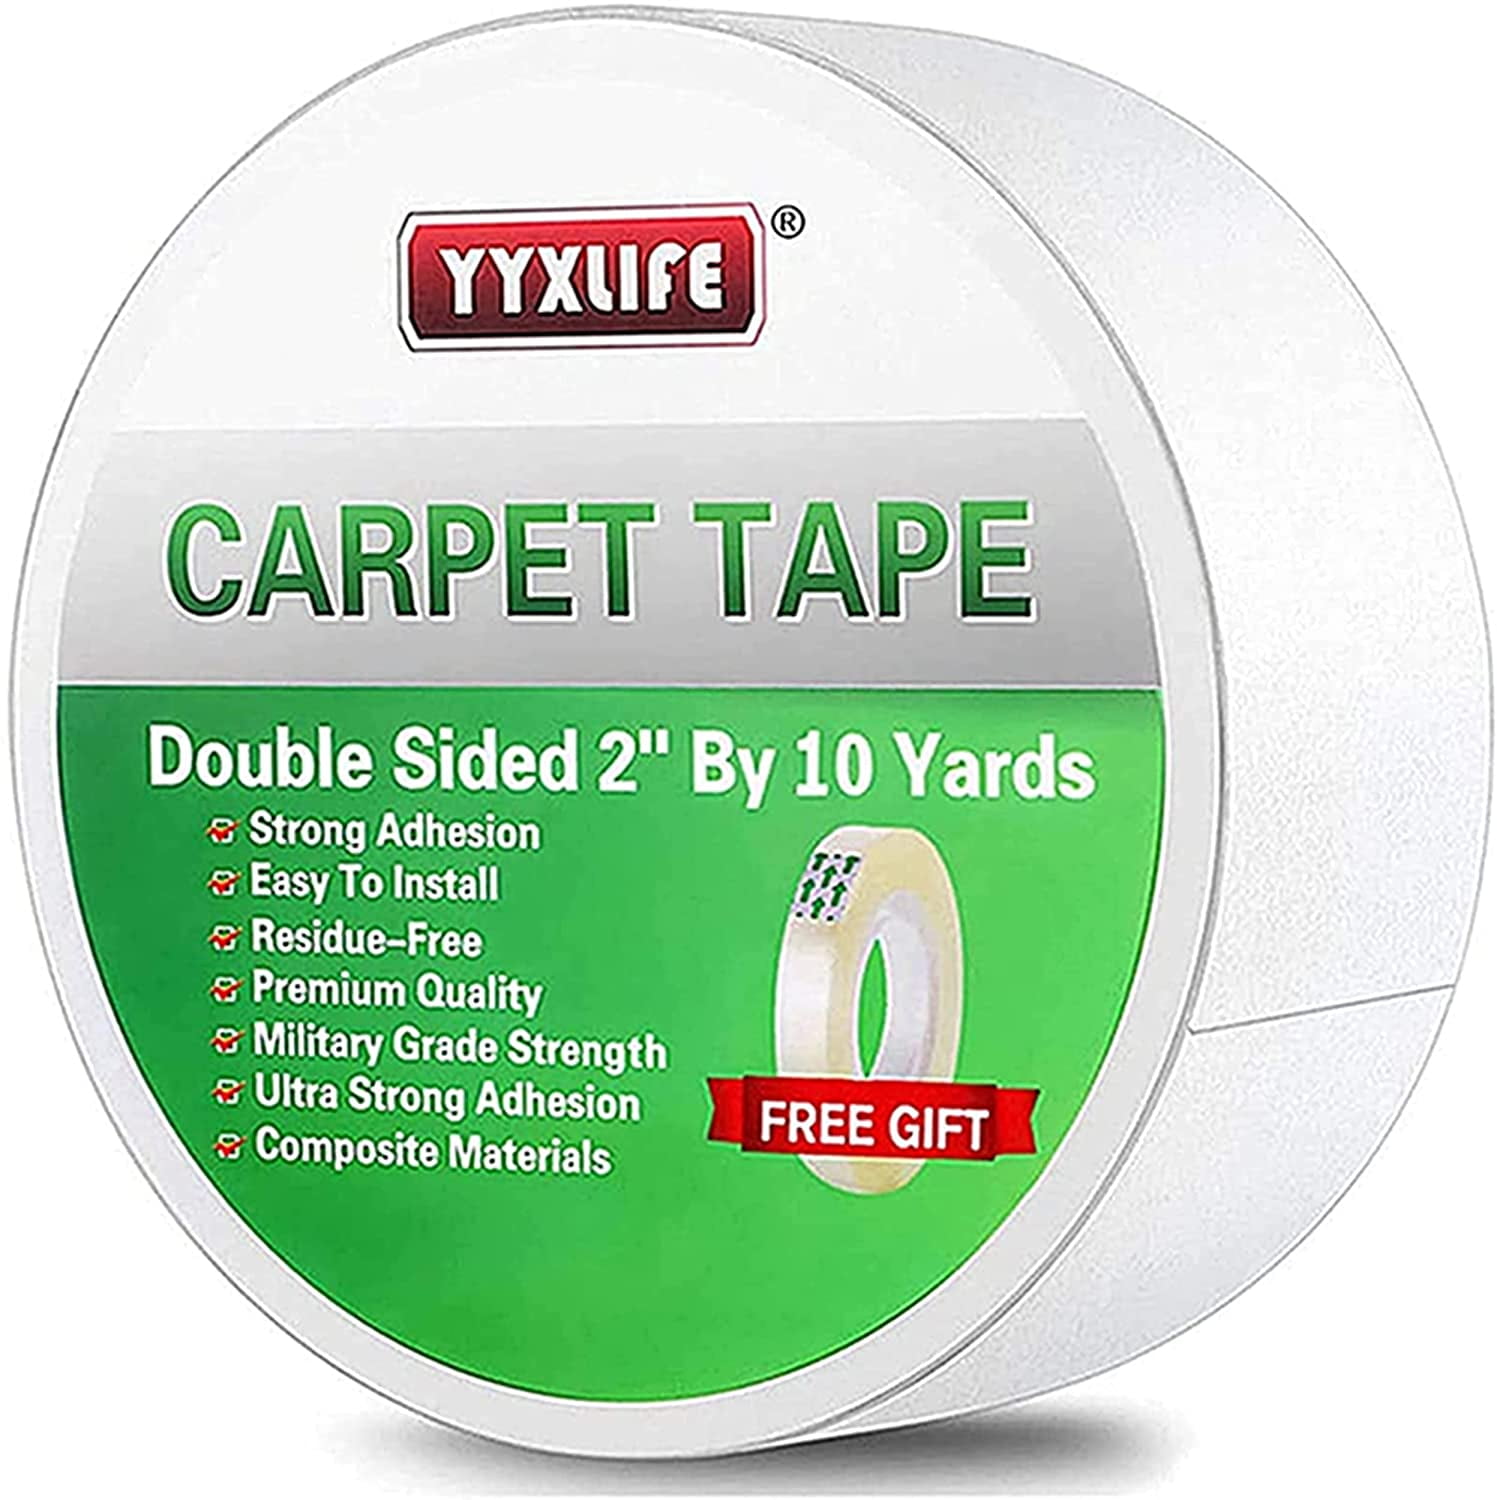 Professional Rug Tape - 2 Inch by 40 Yards (120 Feet! - 2X More